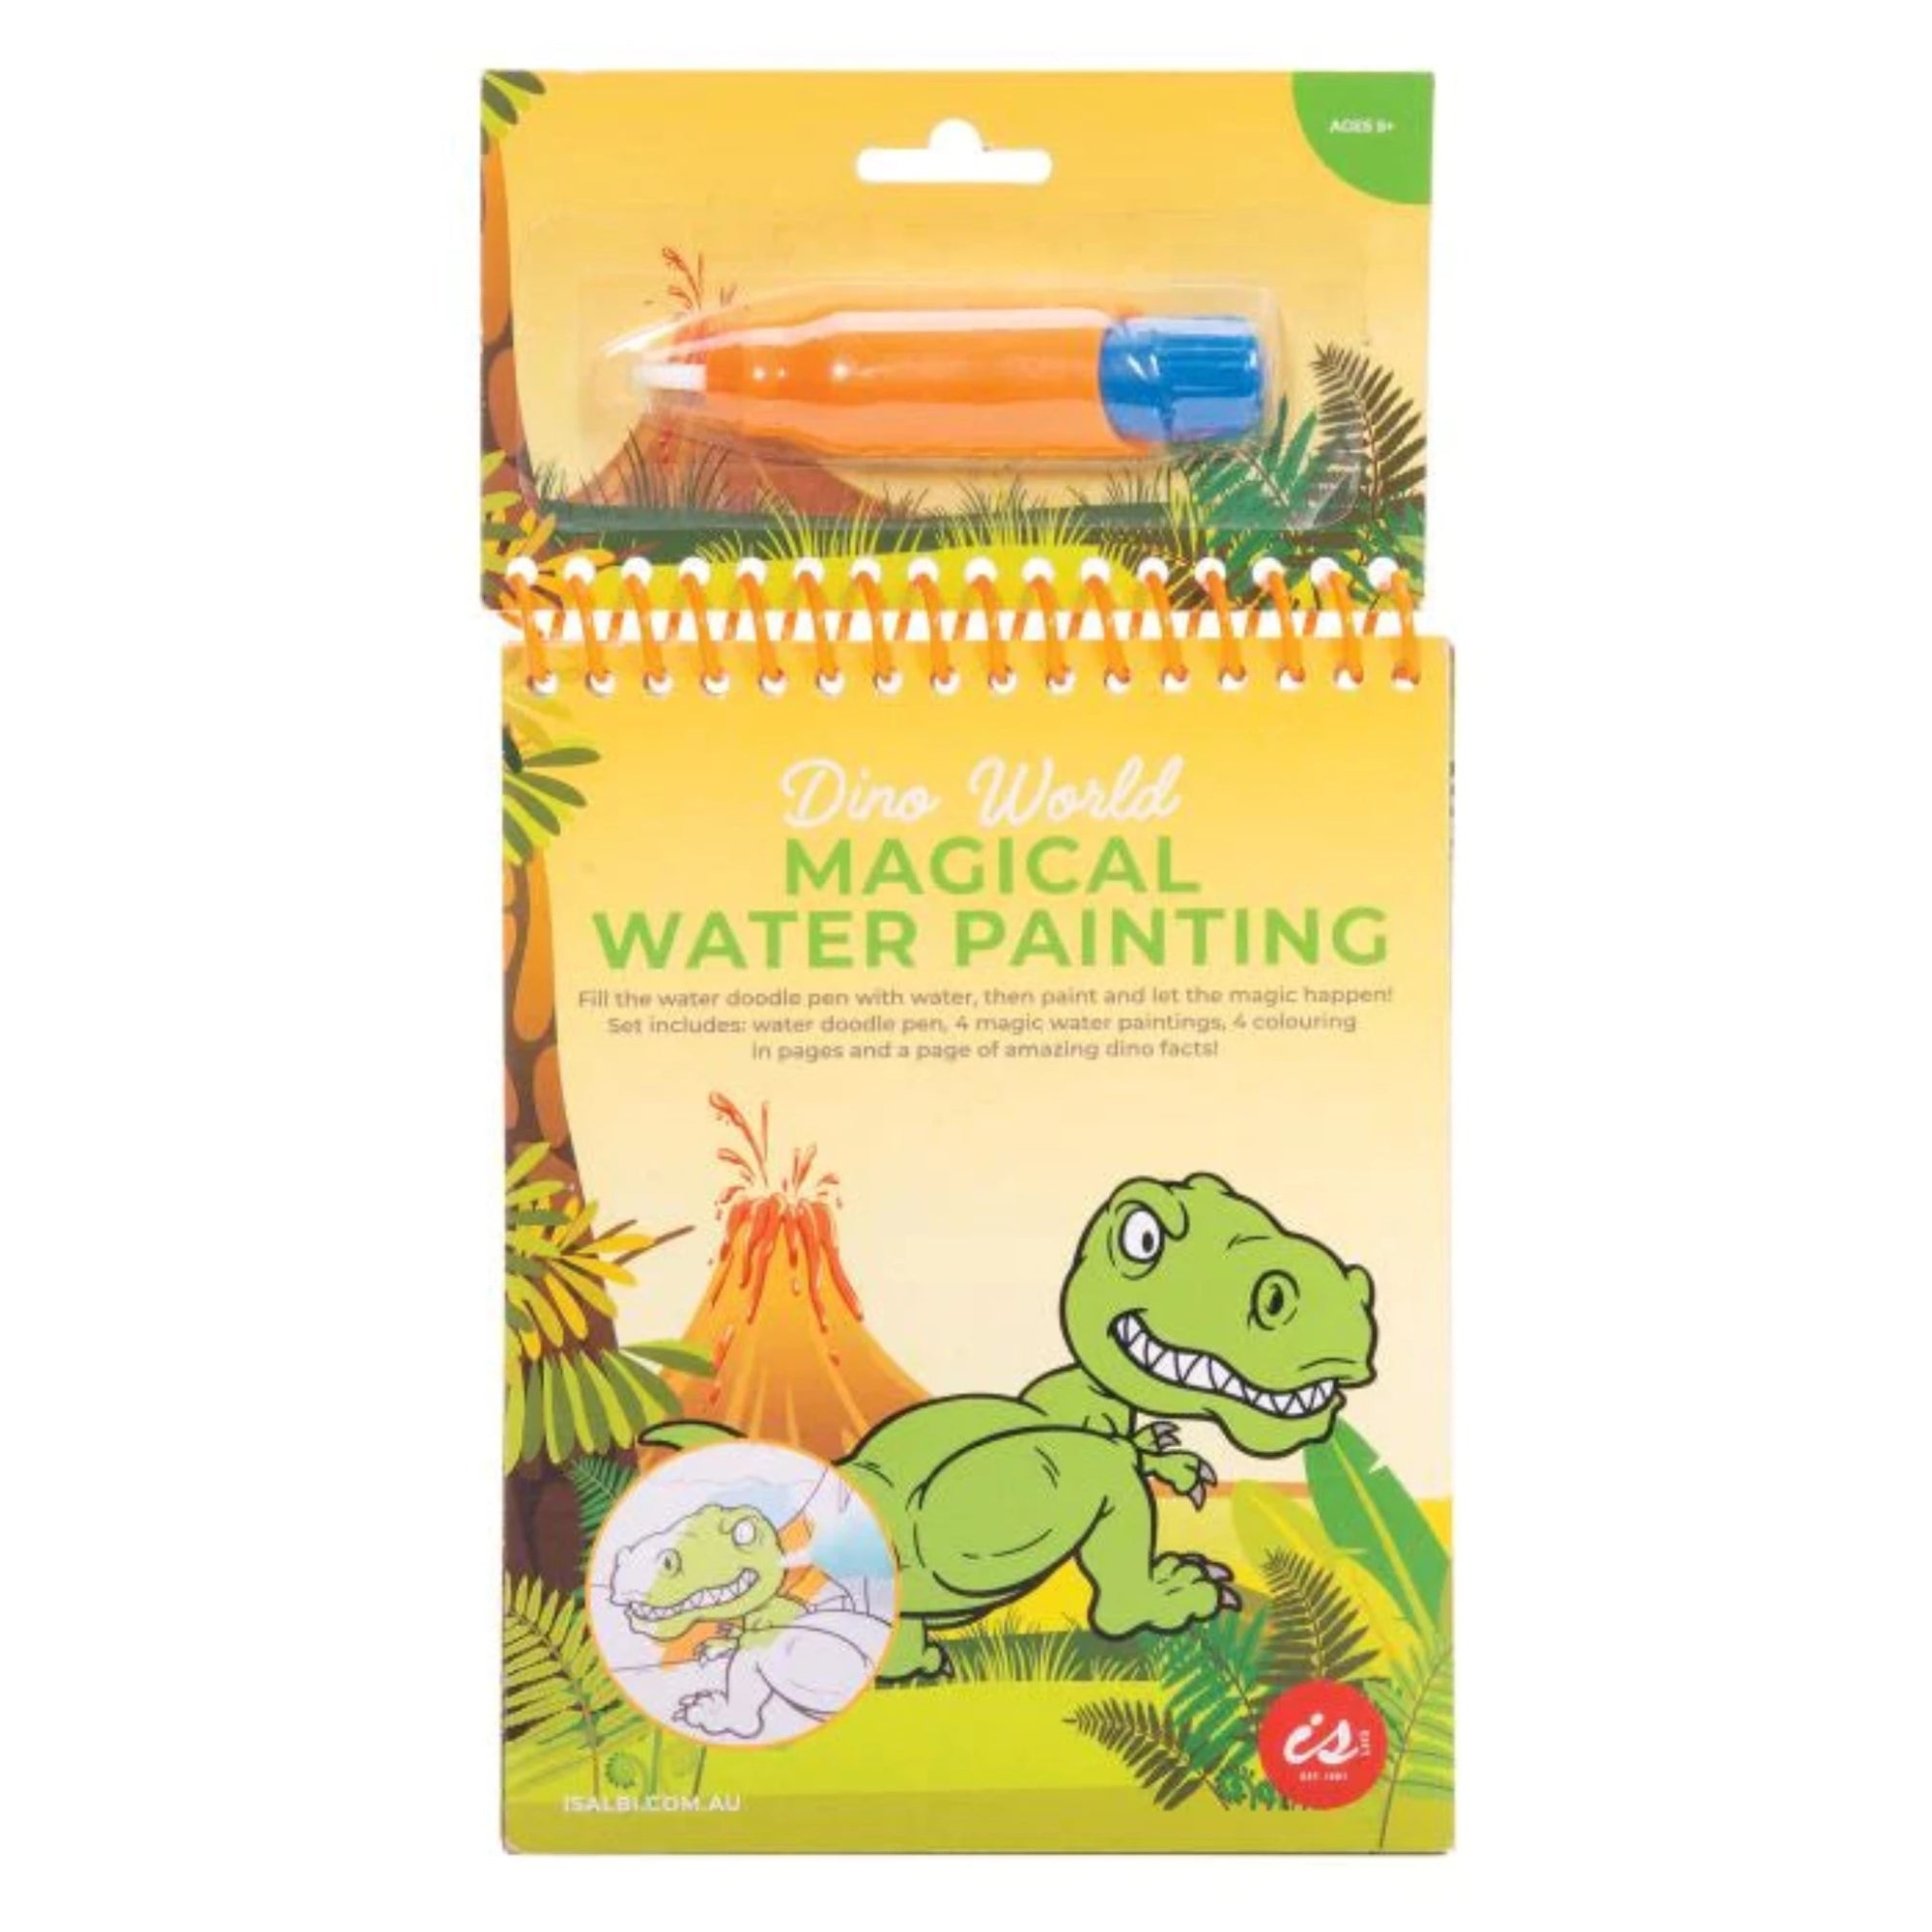 Dino World Magical Water Painting